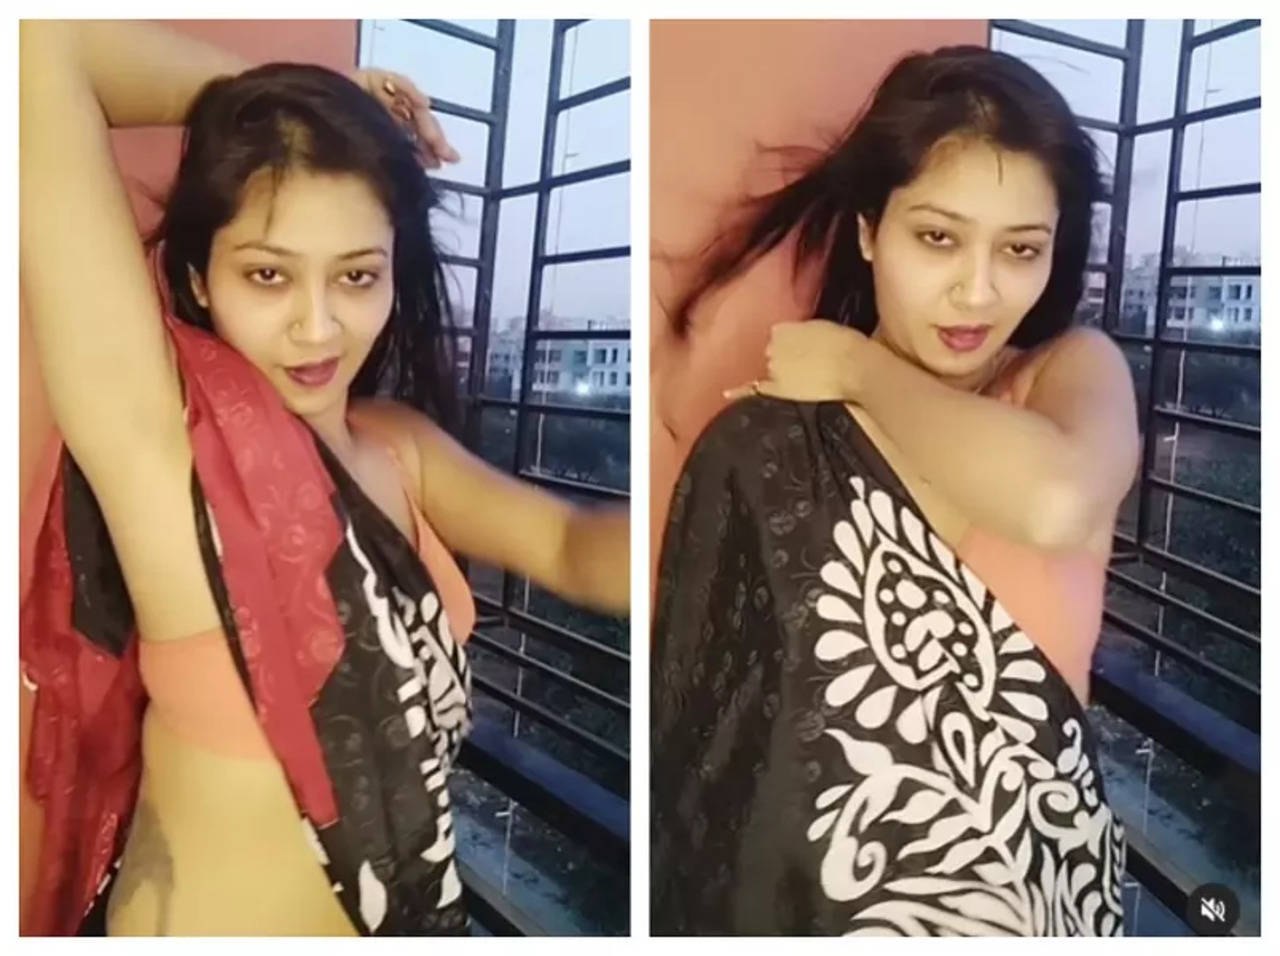 Payal Heroine Xxx - Watch: Payel Sarkar dances in see-through saree and pink bra, video goes  viral | Bengali Movie News - Times of India